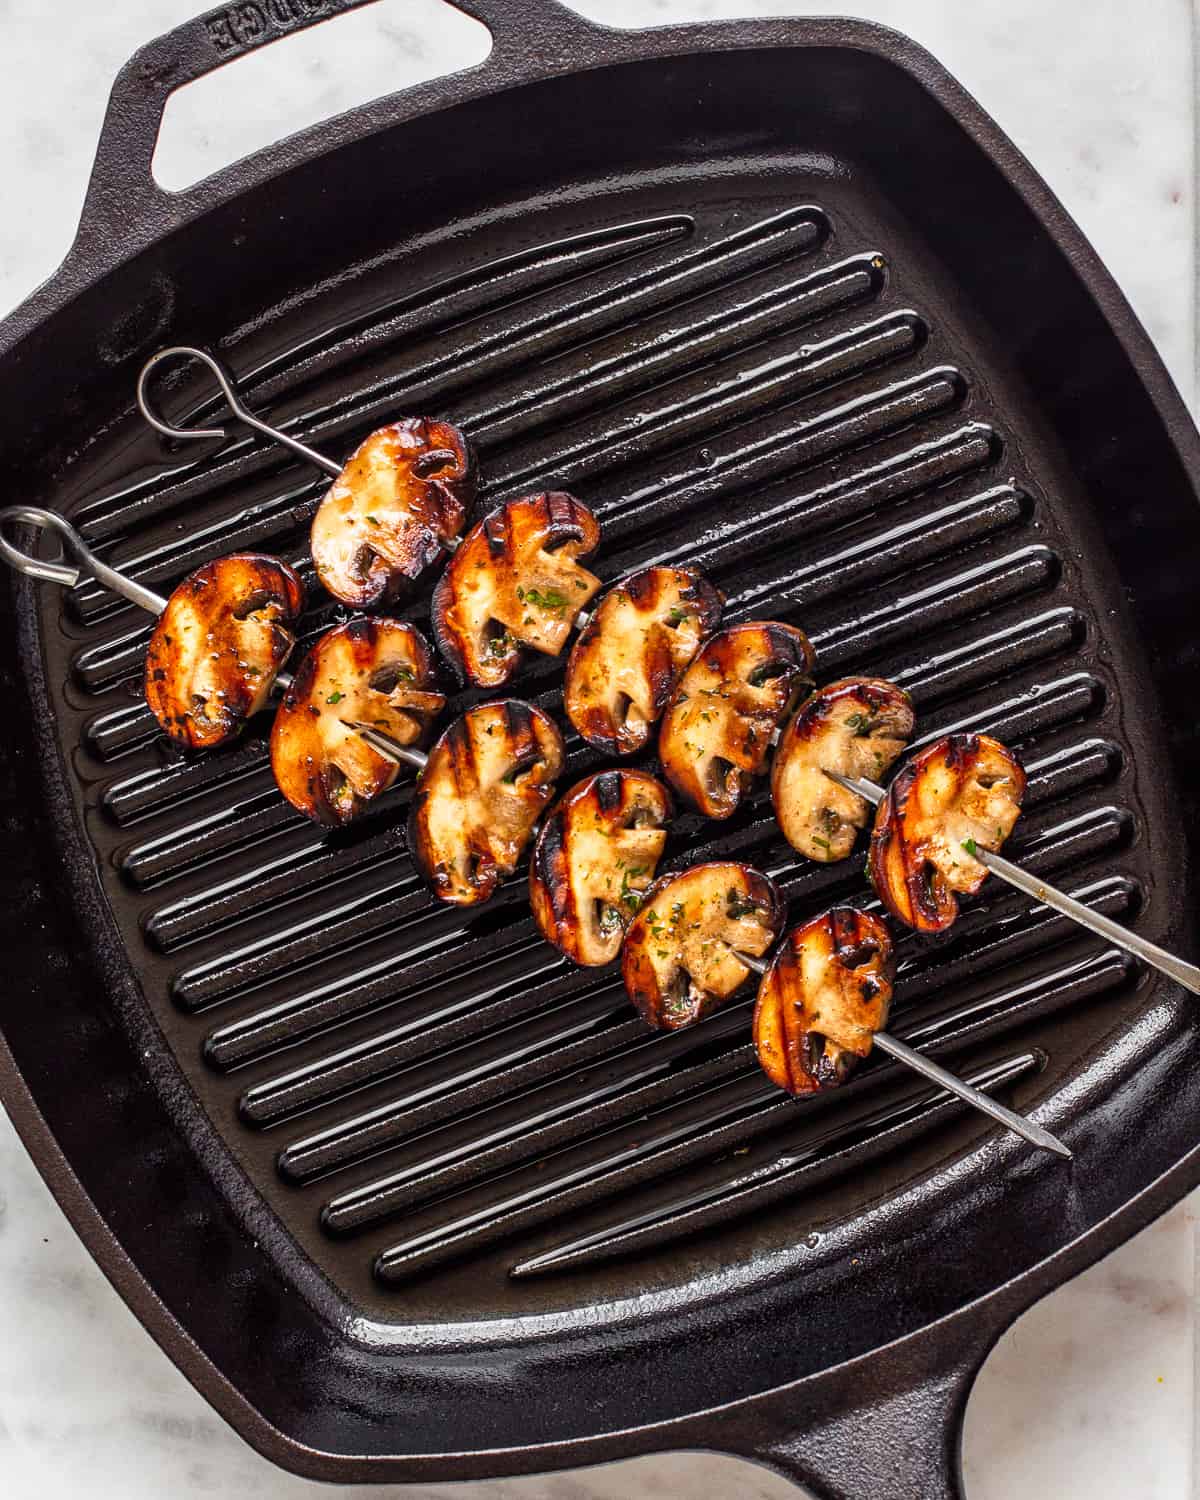 Two mushroom skewers with grill marks in a black cast iron grill pan.